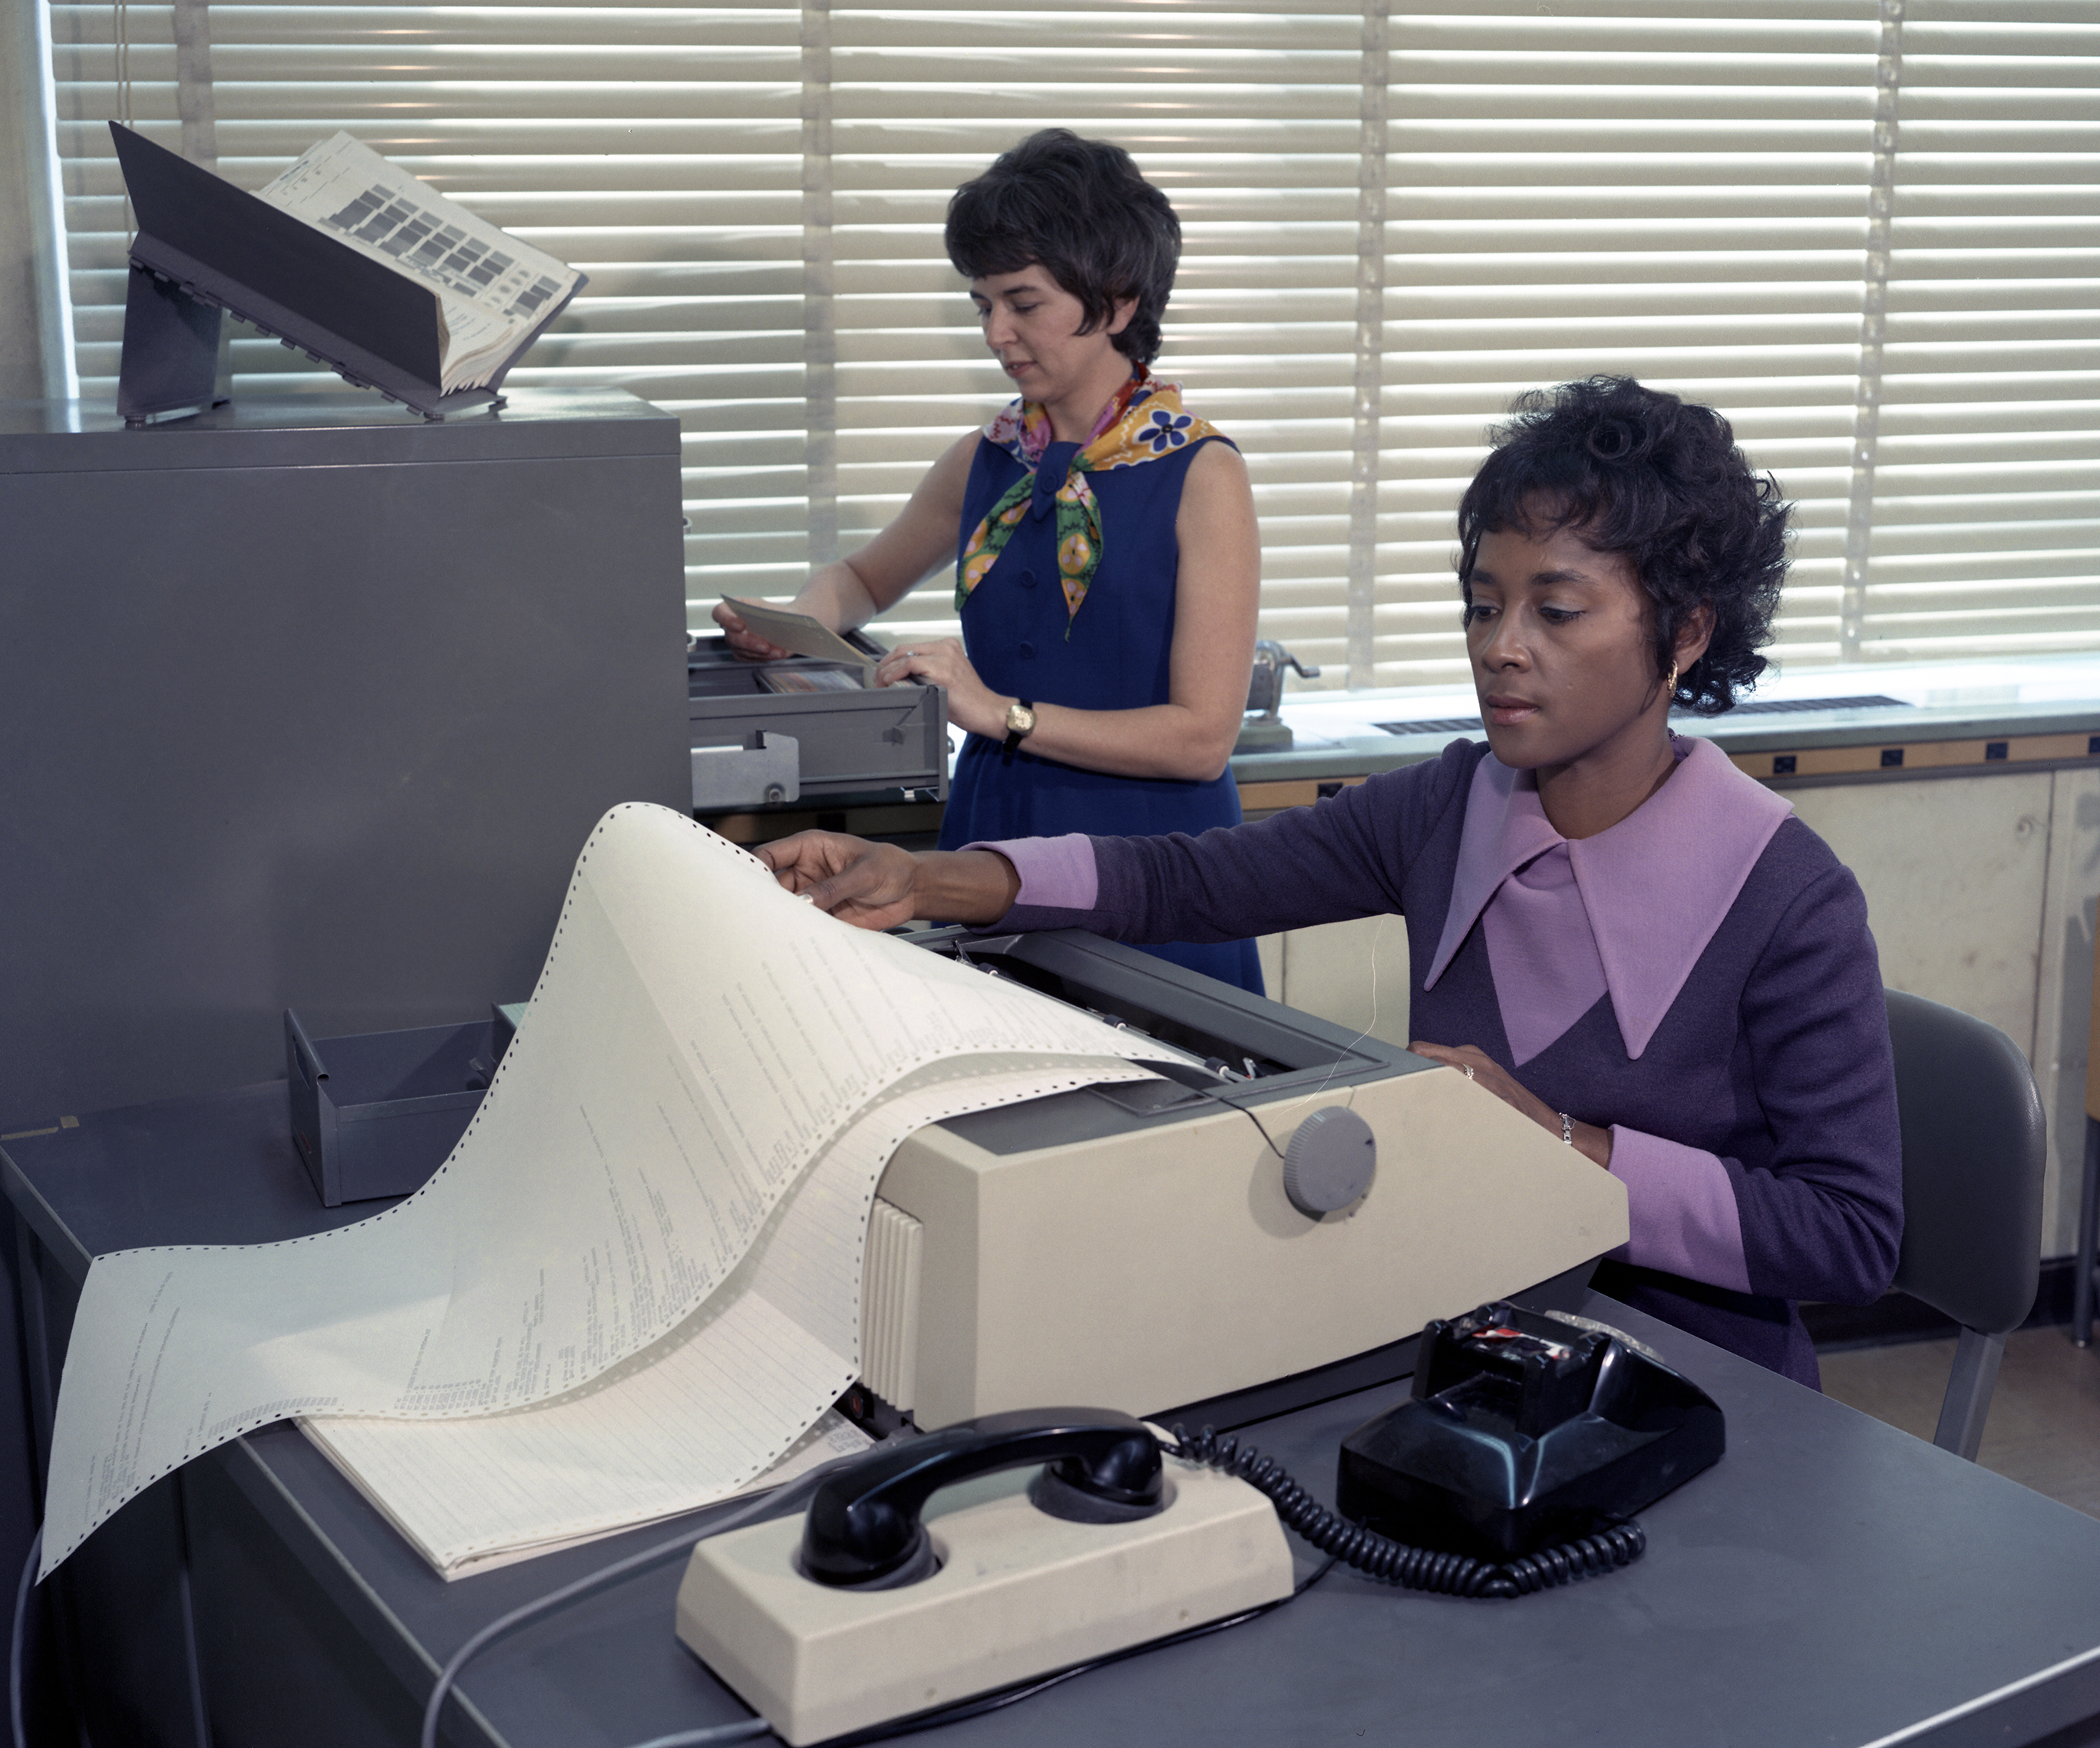 Annie Easley works at a desk with a machine creating a printout while a woman stands at a filing cabinet behind her.